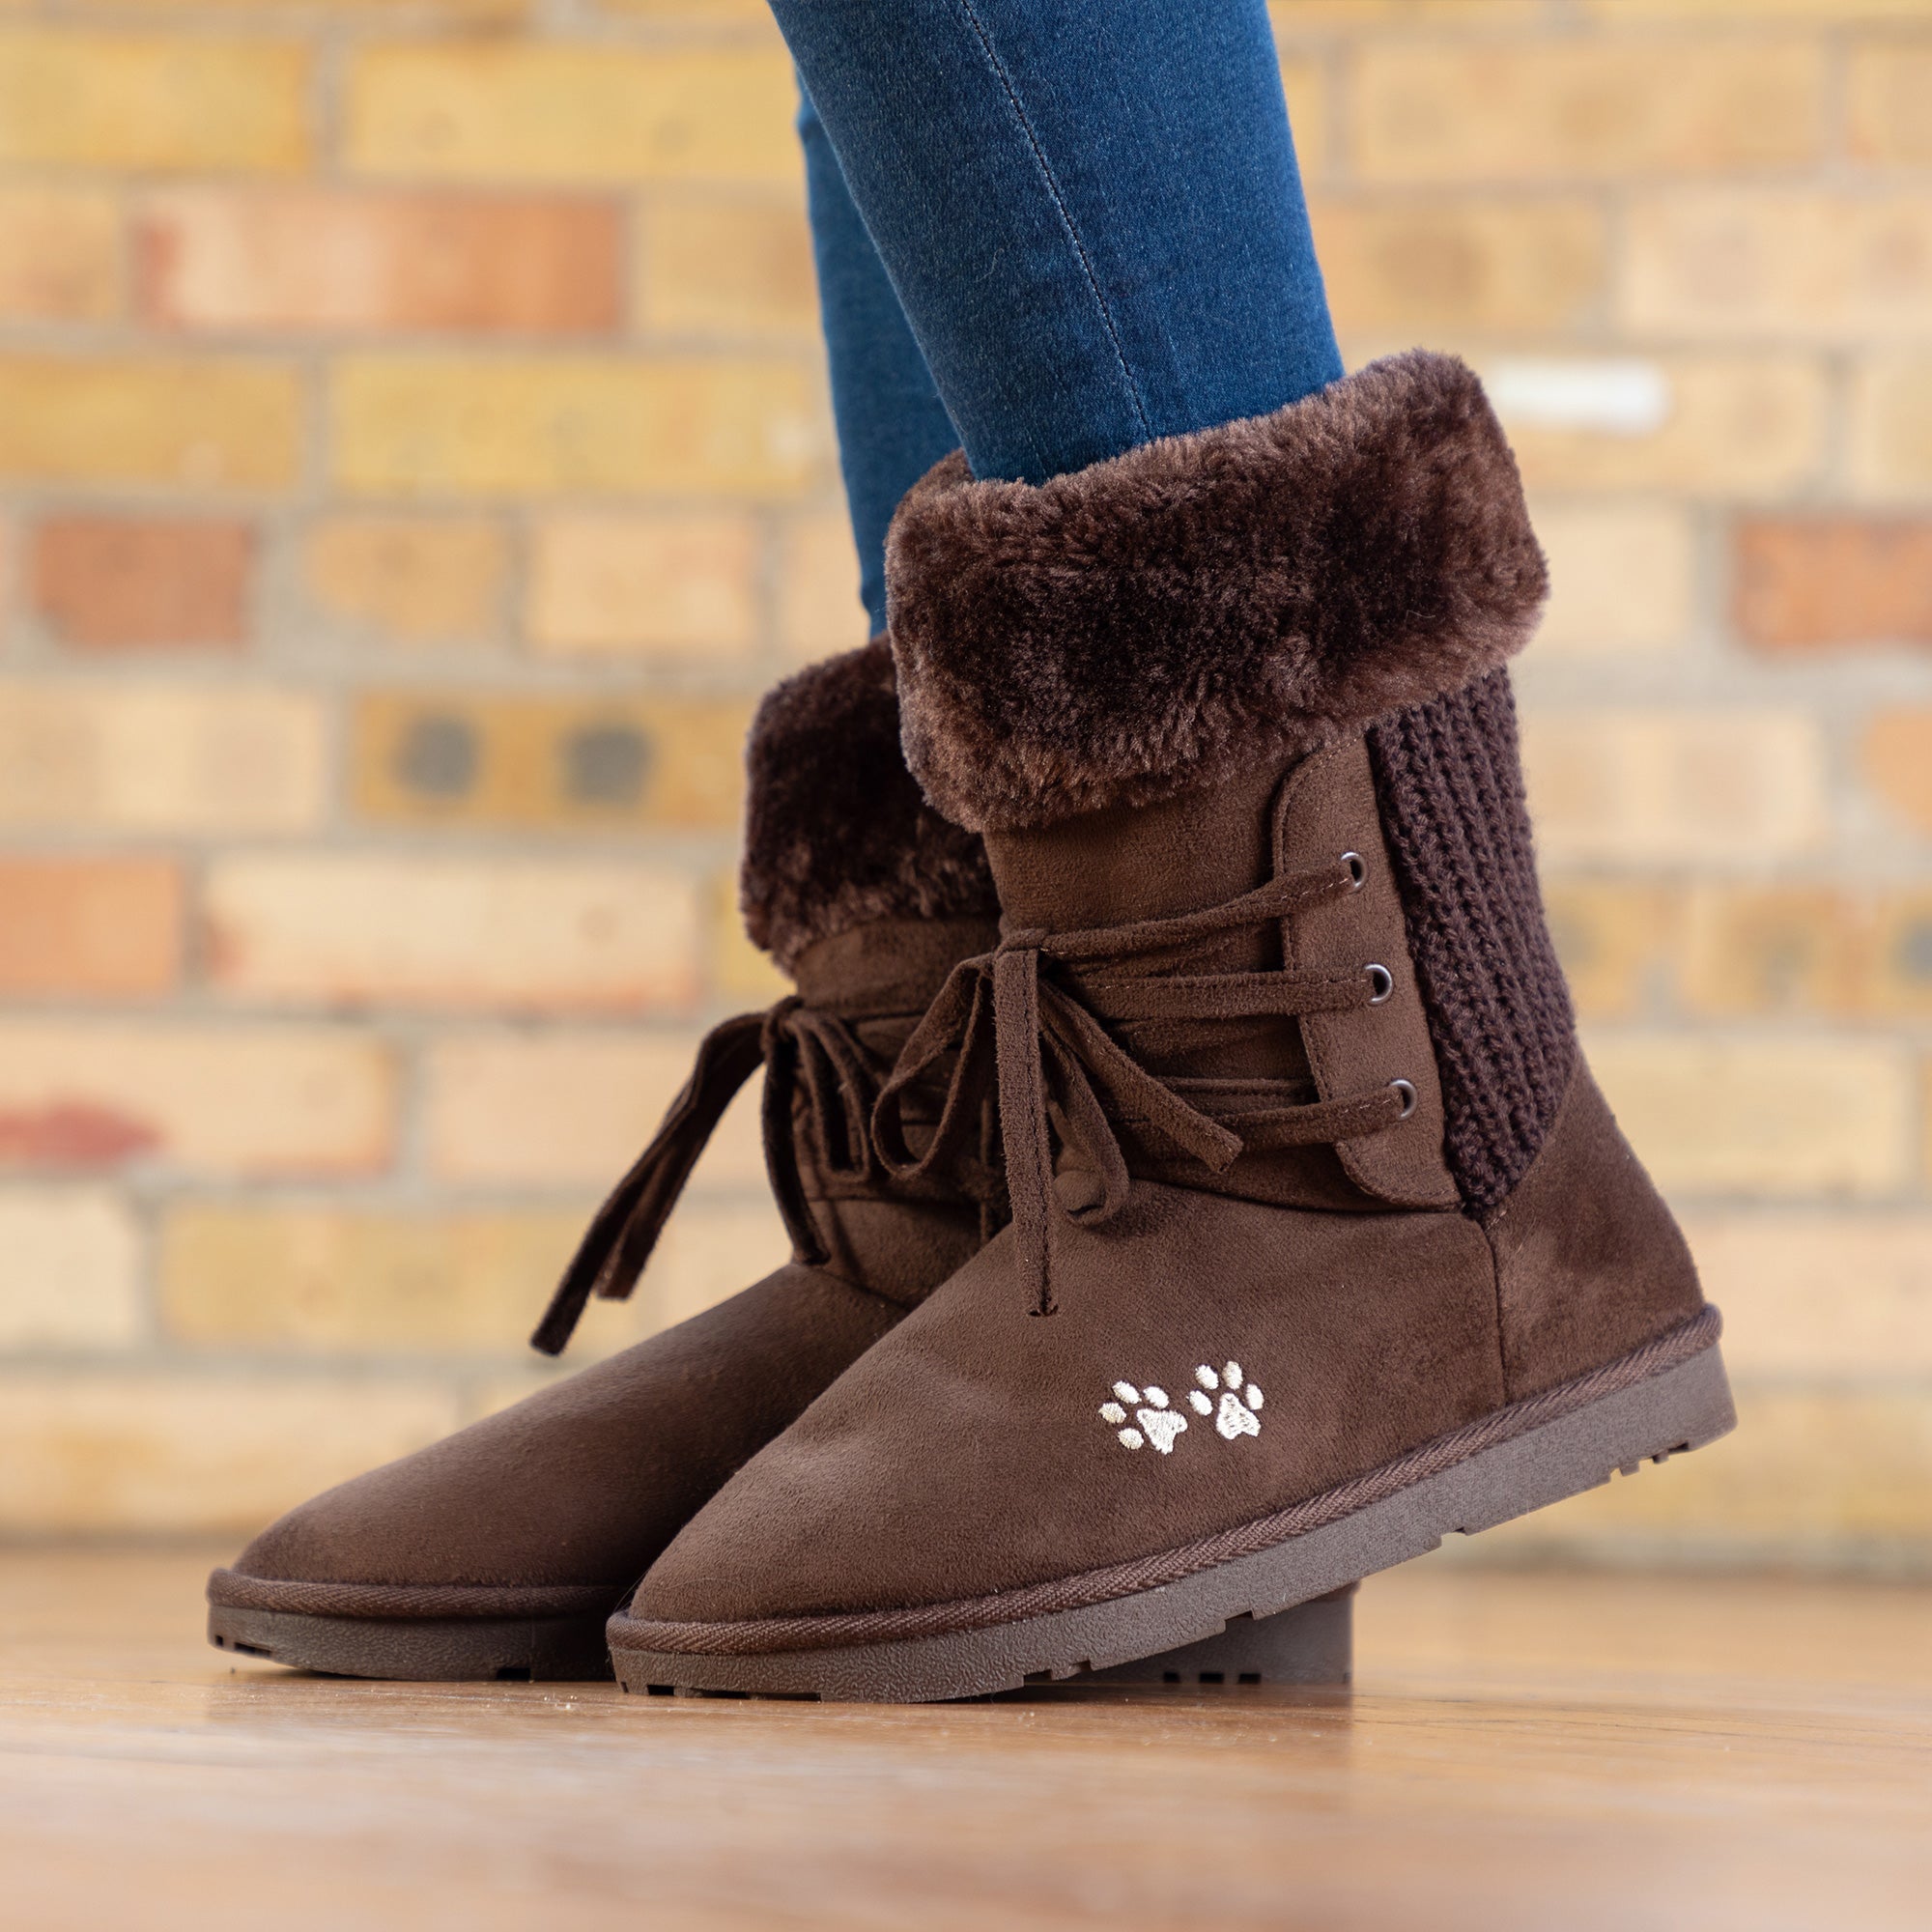 Lace-Up Paw Print Sweater Boots - Brown - 6